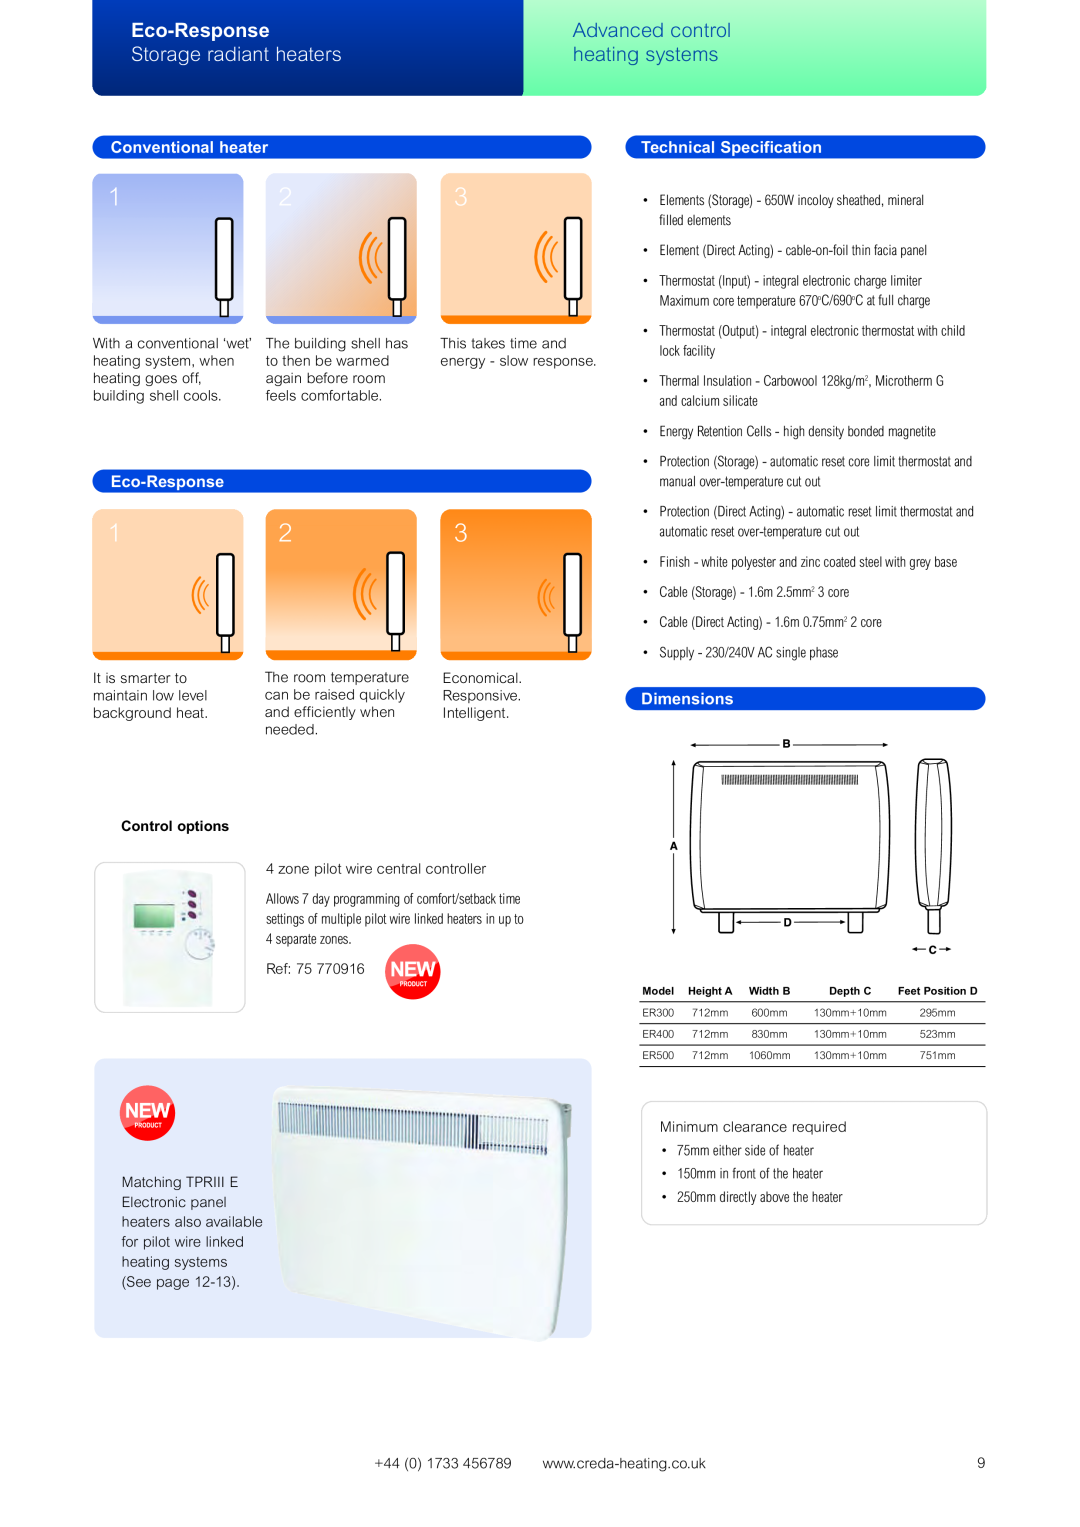 Creda Heating Solution manual Eco-Response, Advanced control, Storage radiant heaters, heating systems, Conventional heater 